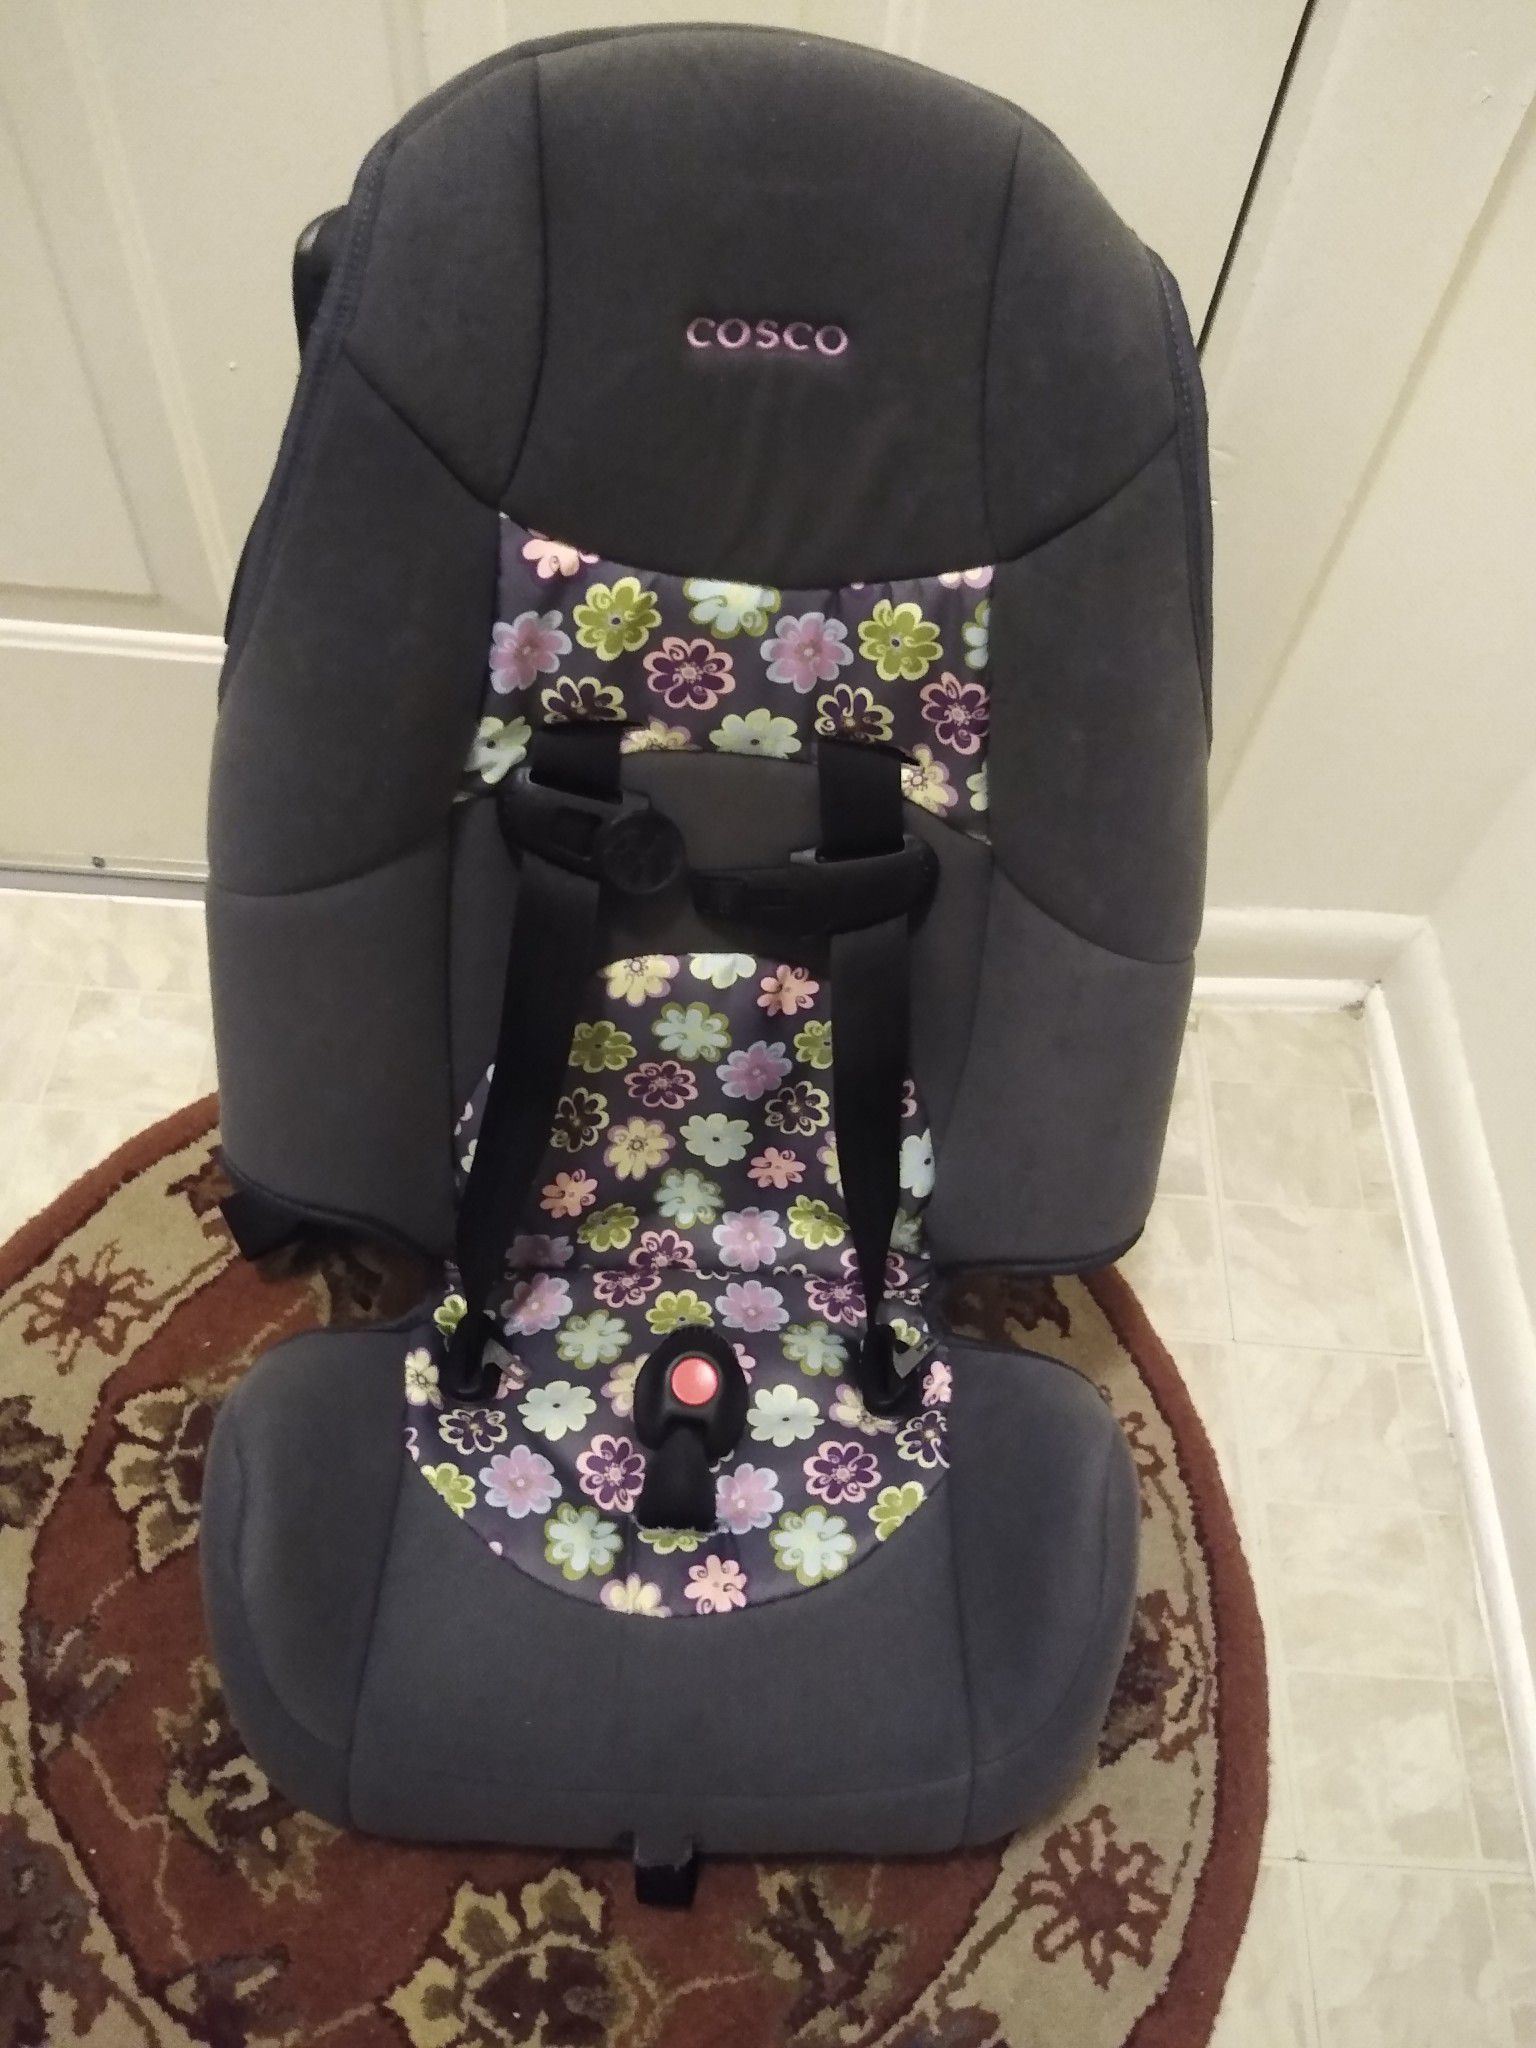 Used booster seat 30.00